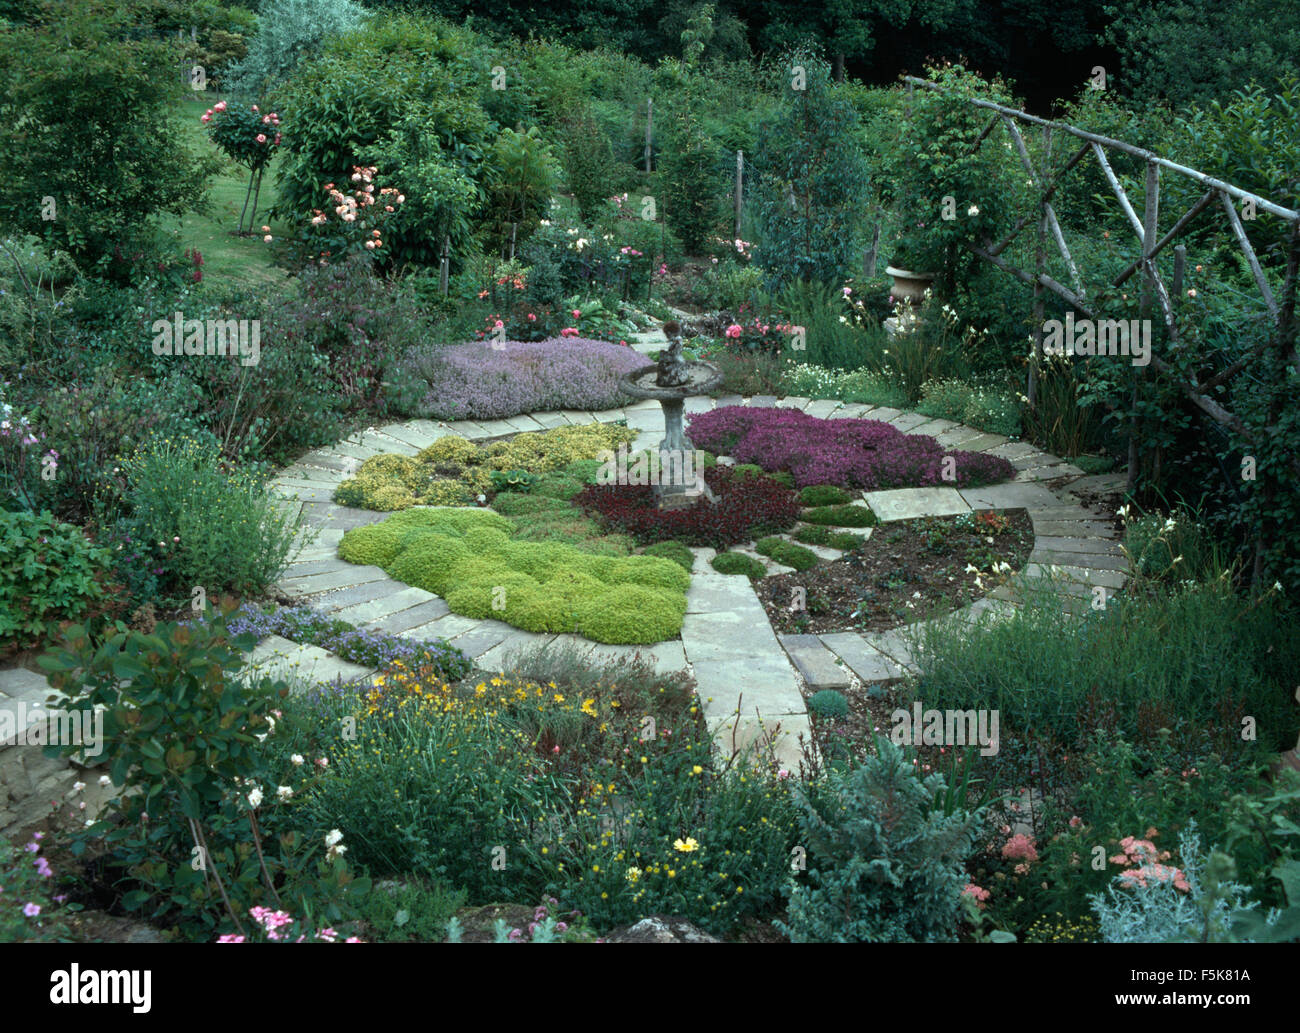 Herbs growing in a circular bed edged with a stone paved path in a large country garden in summer Stock Photo